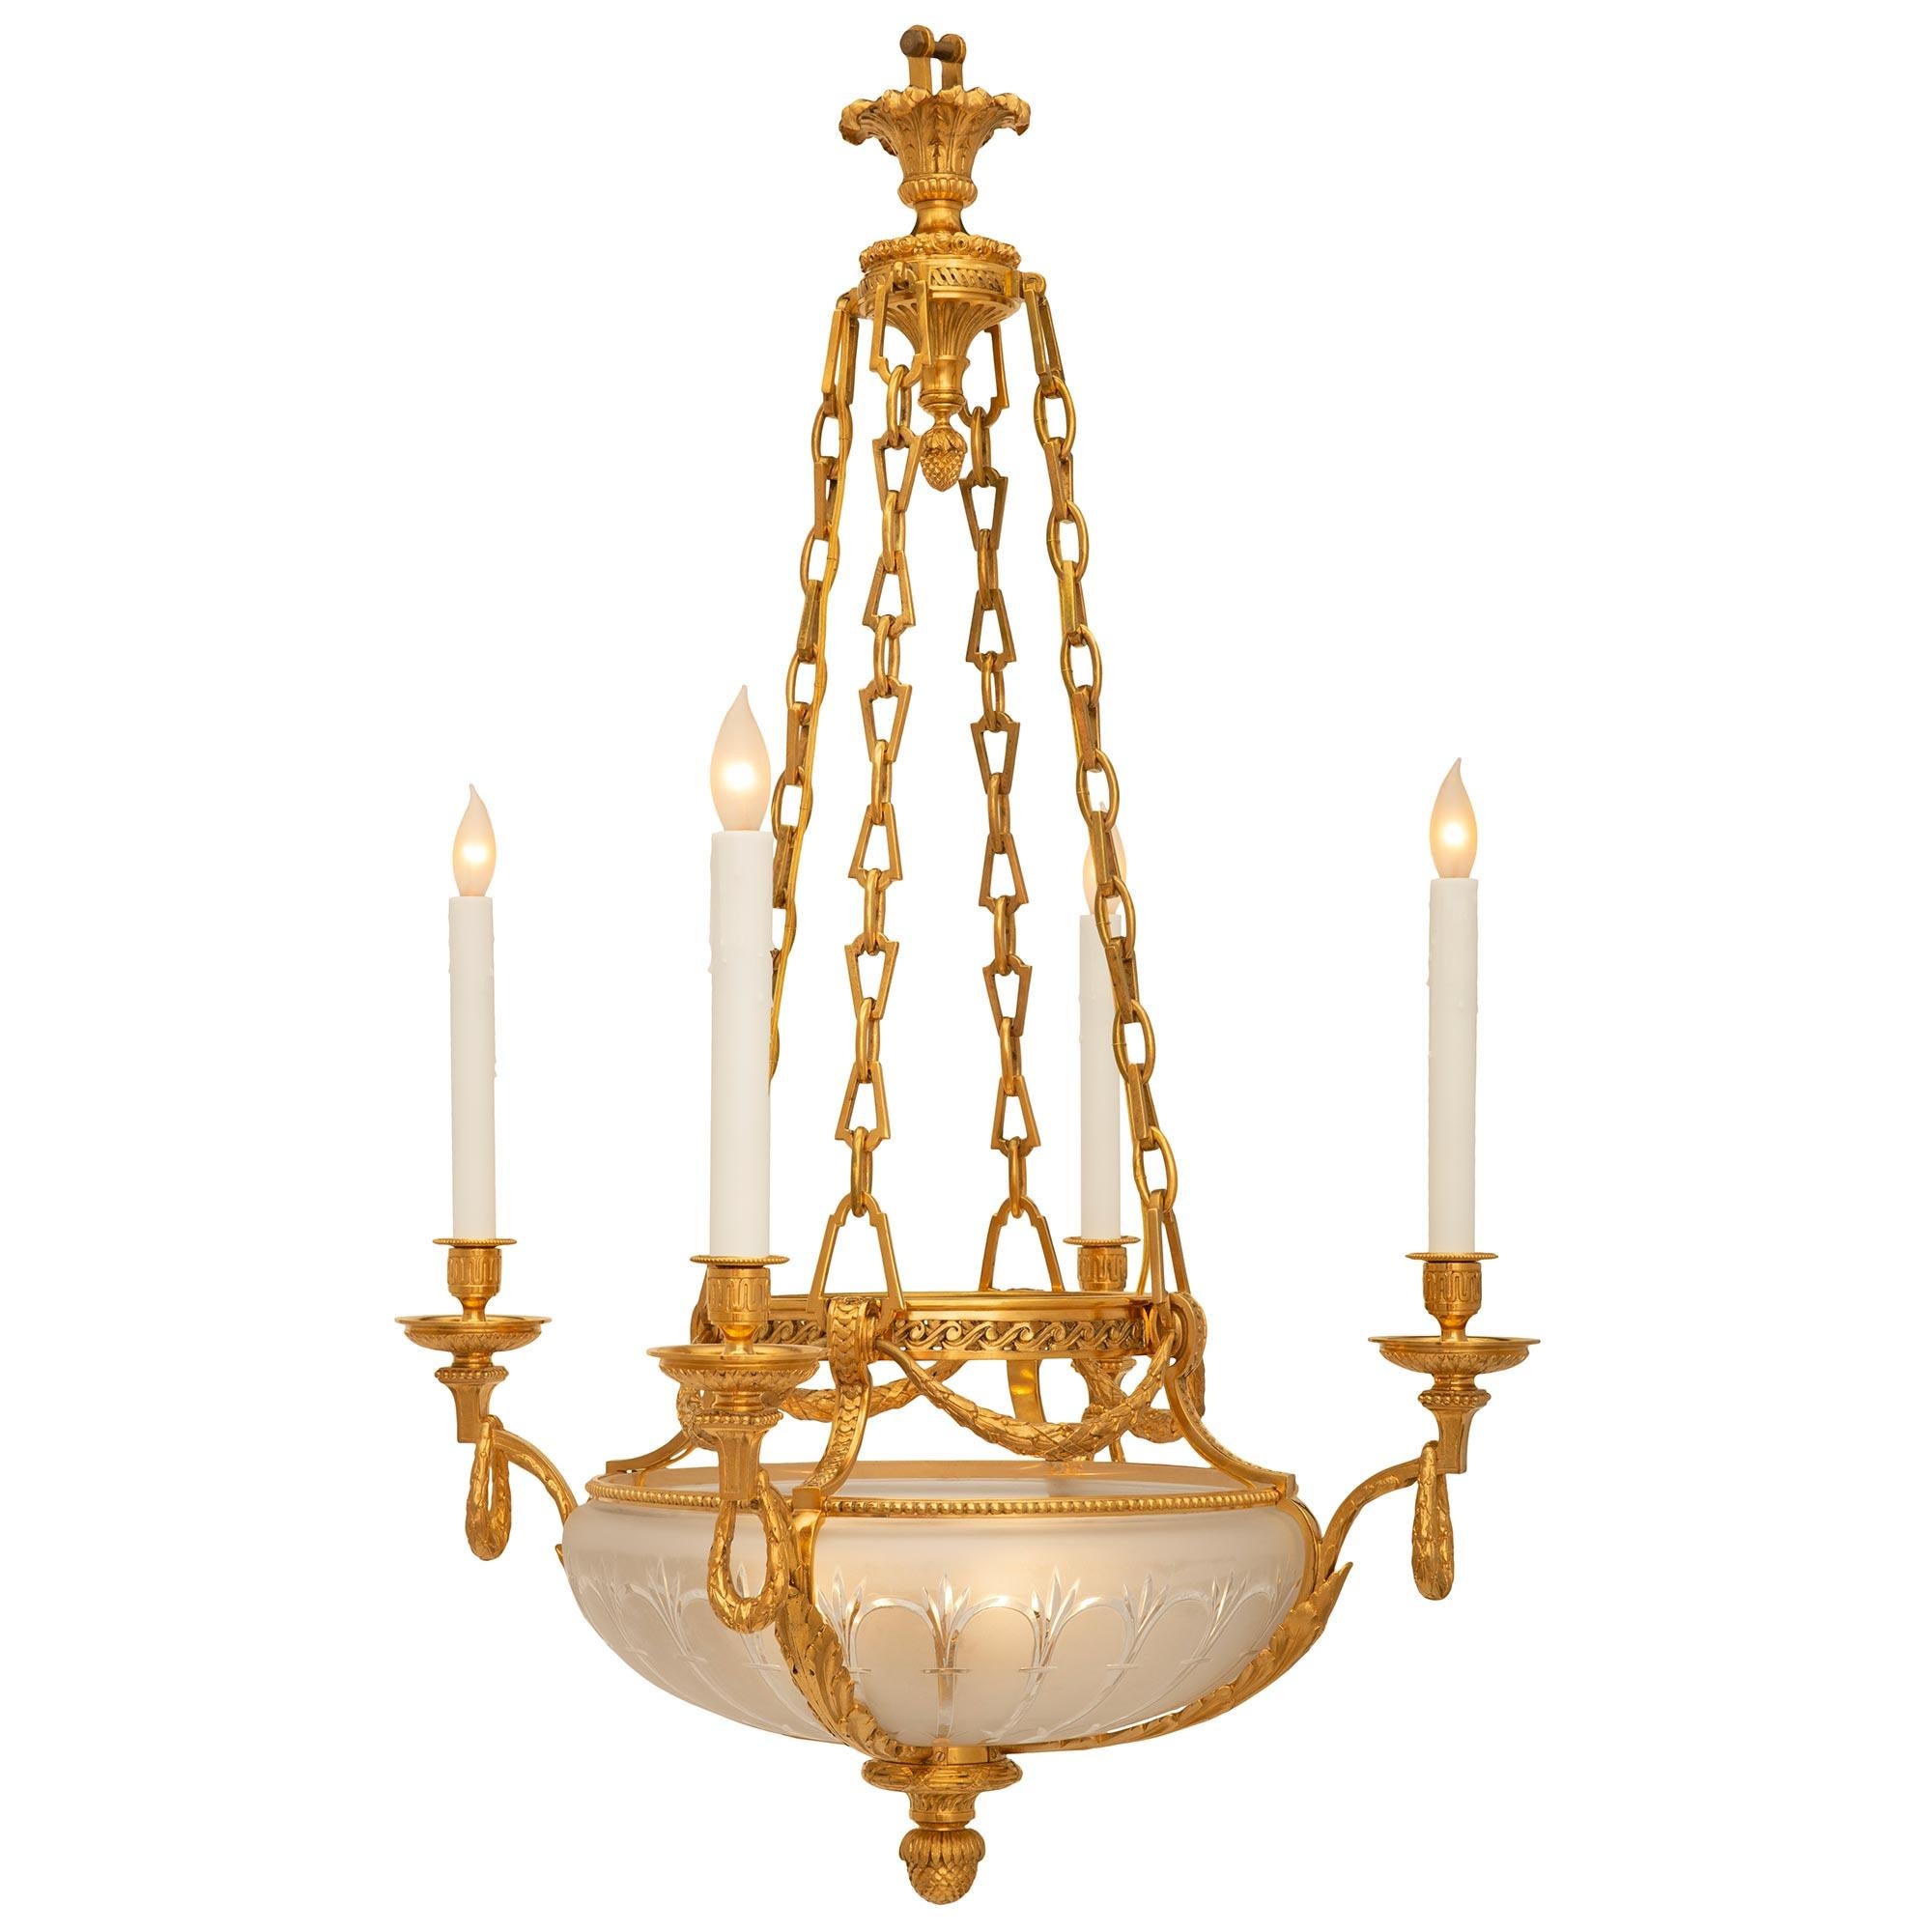 A beautiful and most unique French 19th century Louis XVI st. ormolu and etched frosted crystal chandelier. The four arm eight light chandelier is centered by a beautiful richly chased bottom acorn finial below fine spiral fluted and tied reeded